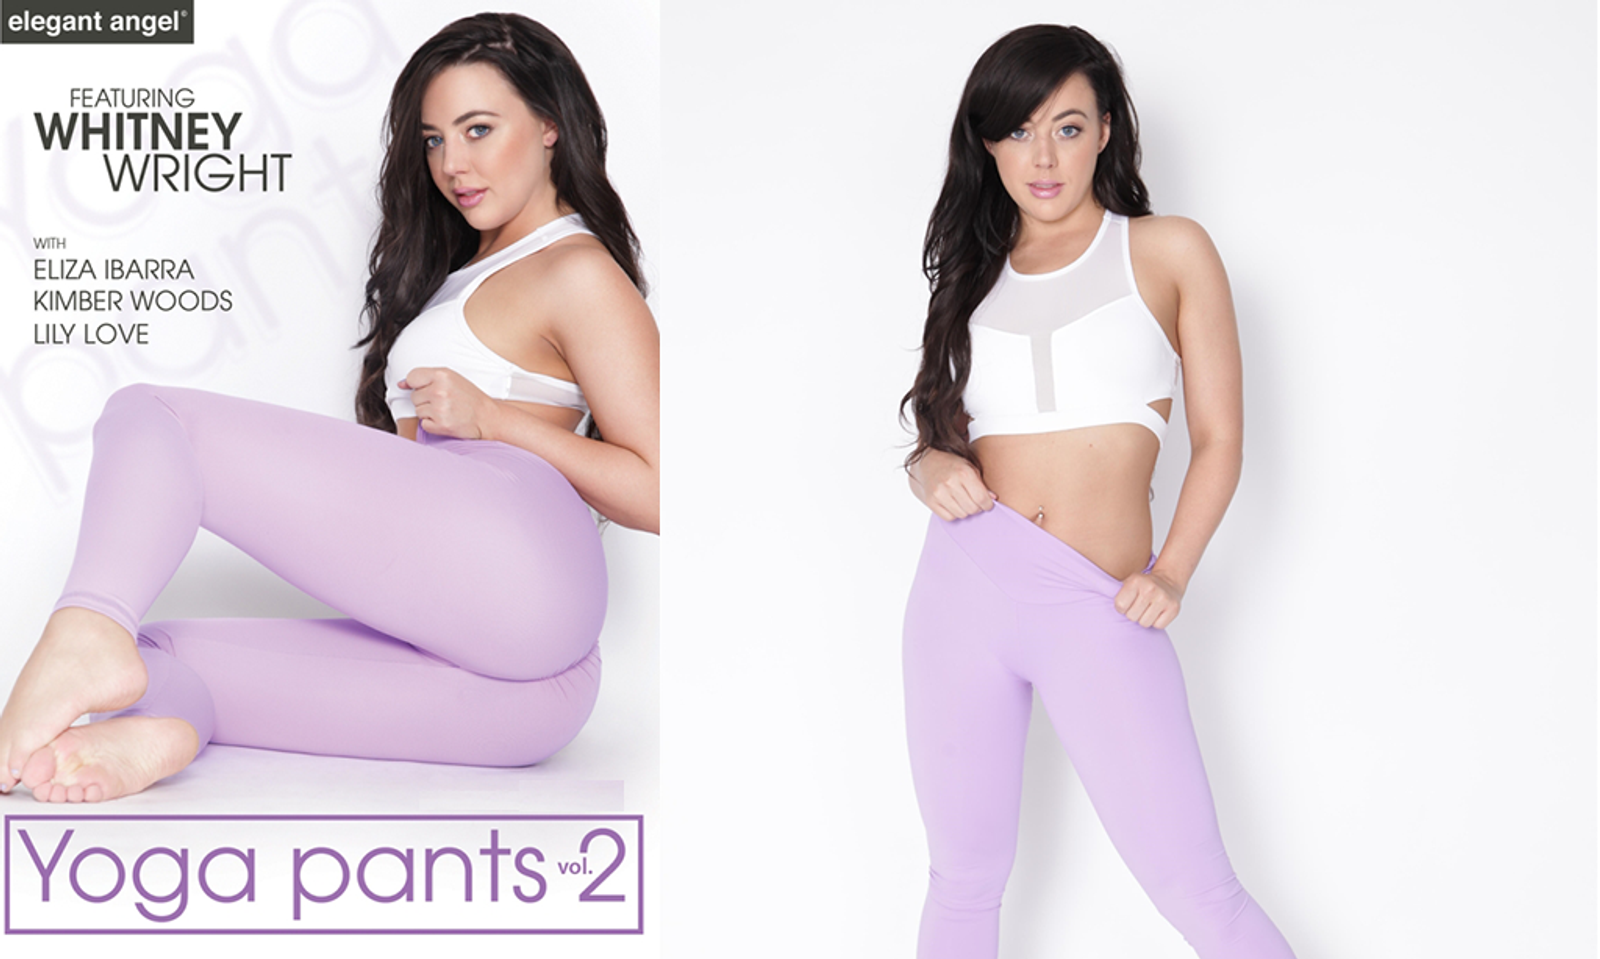 Whitney Wright Gets The Cover Of Elegant Angel's 'Yoga Pants 2'